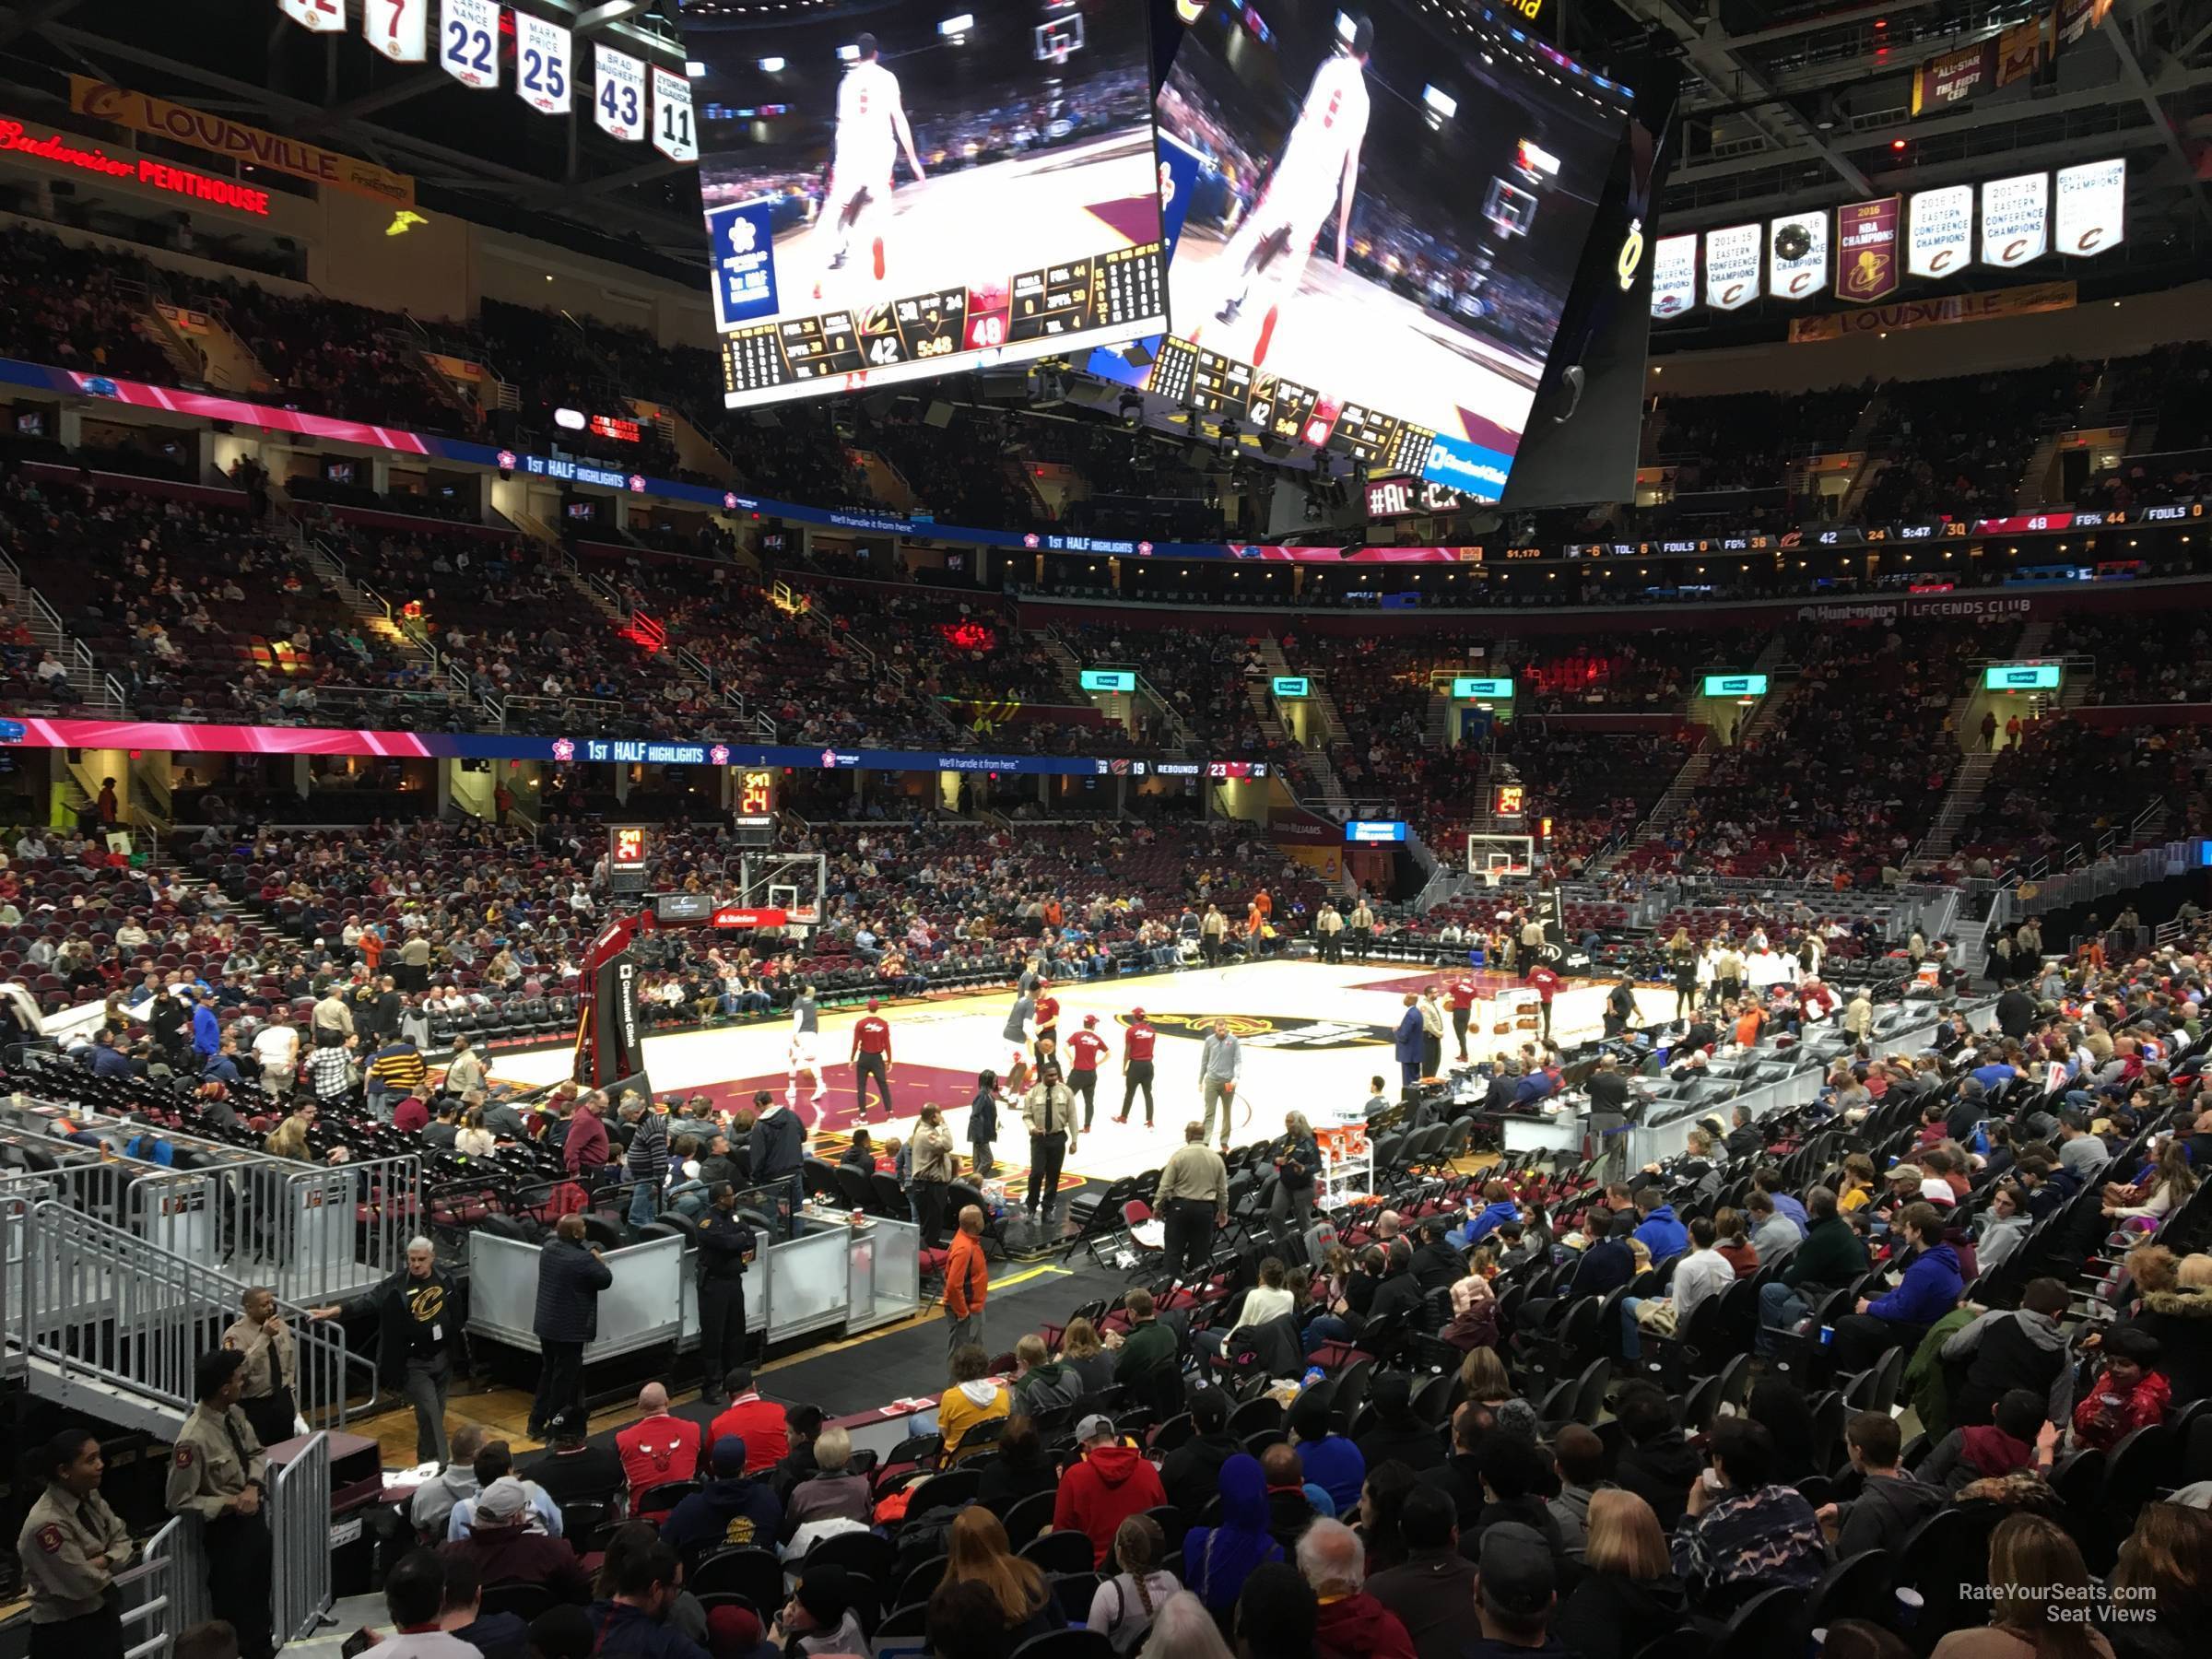 section 110, row 14 seat view  for basketball - rocket mortgage fieldhouse